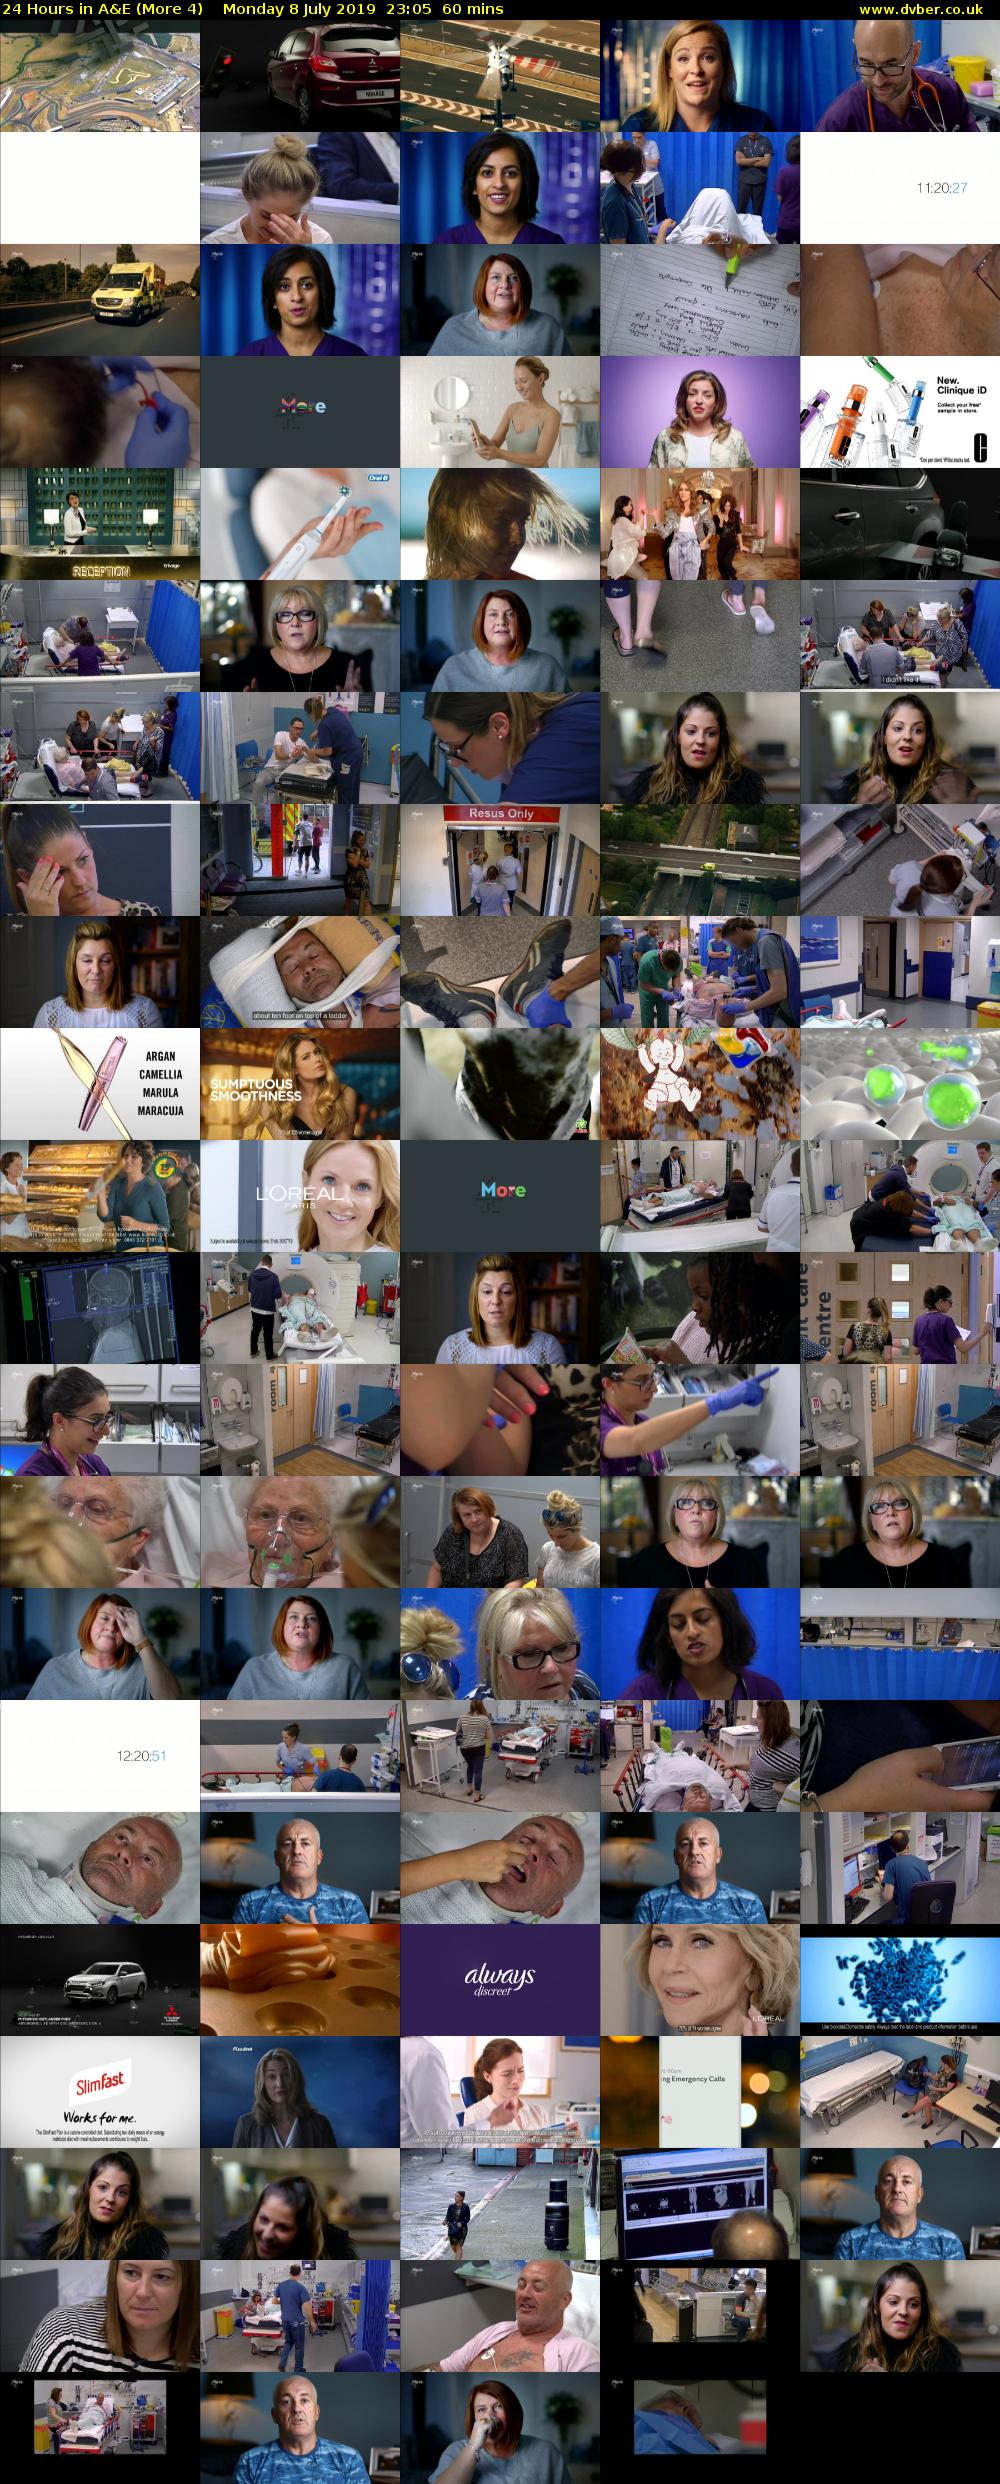 24 Hours in A&E (More 4) Monday 8 July 2019 23:05 - 00:05